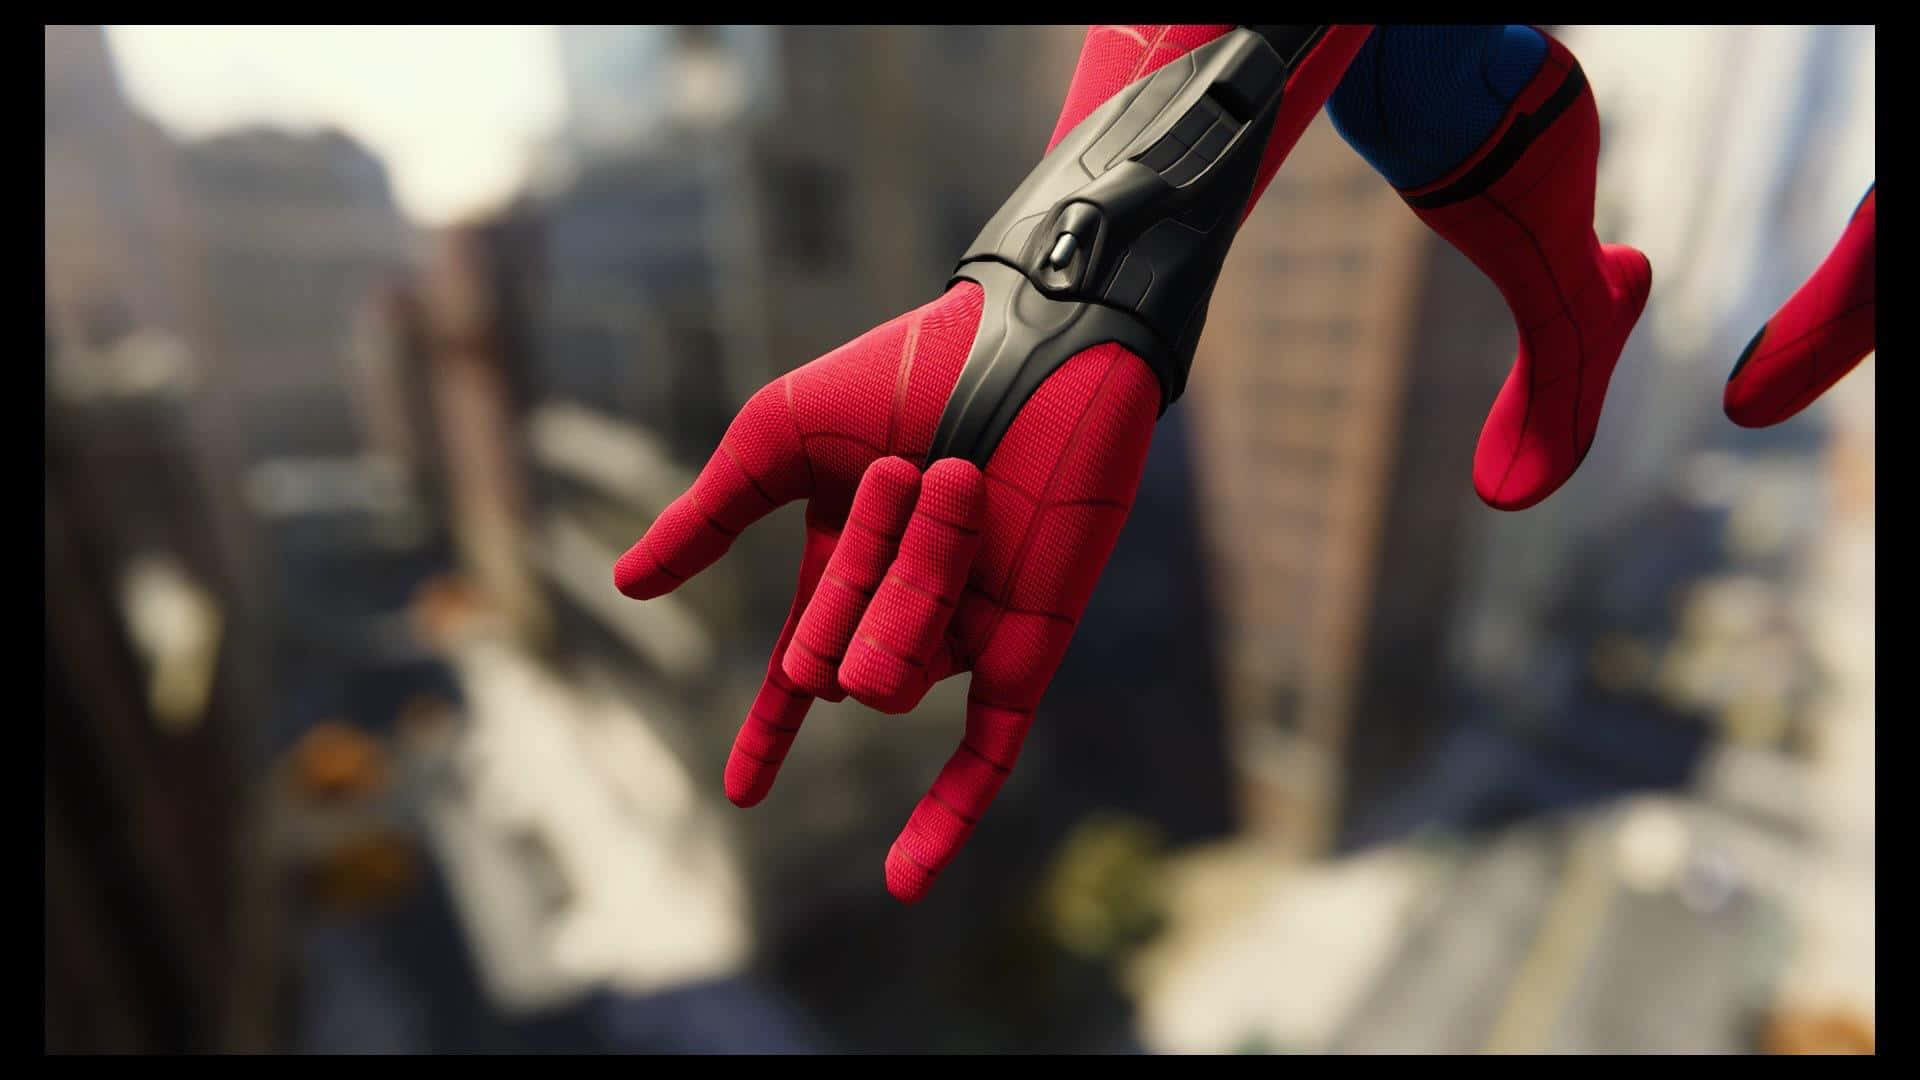 Spider-Man Web Shooter in Action Wallpaper